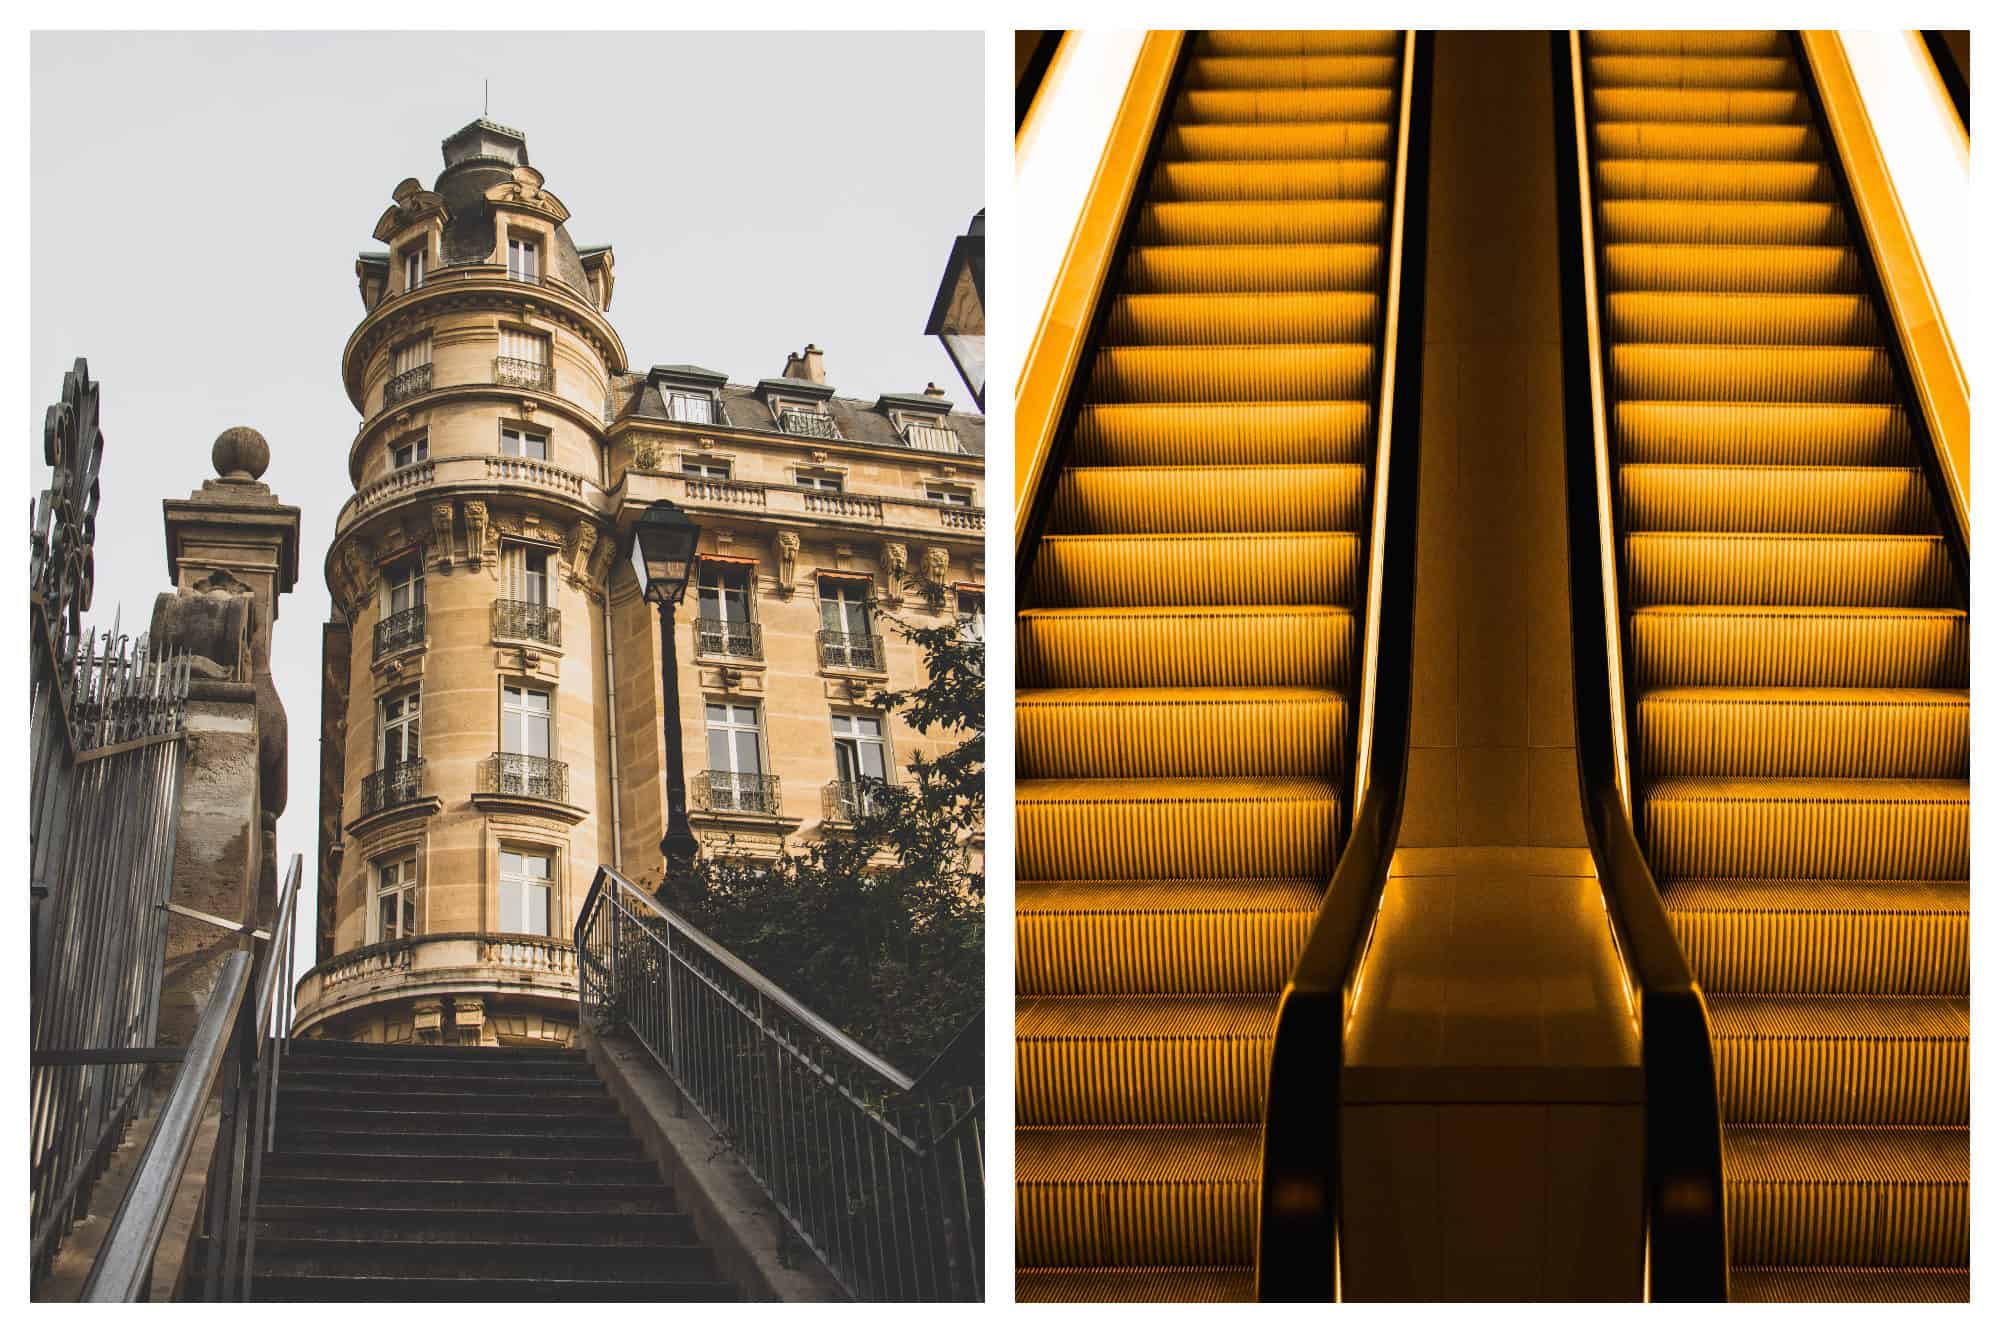 A view of an ornate honey colored building at the top of a flight of stone stairs (left). A pair of elevators under a bright yellow light (right).